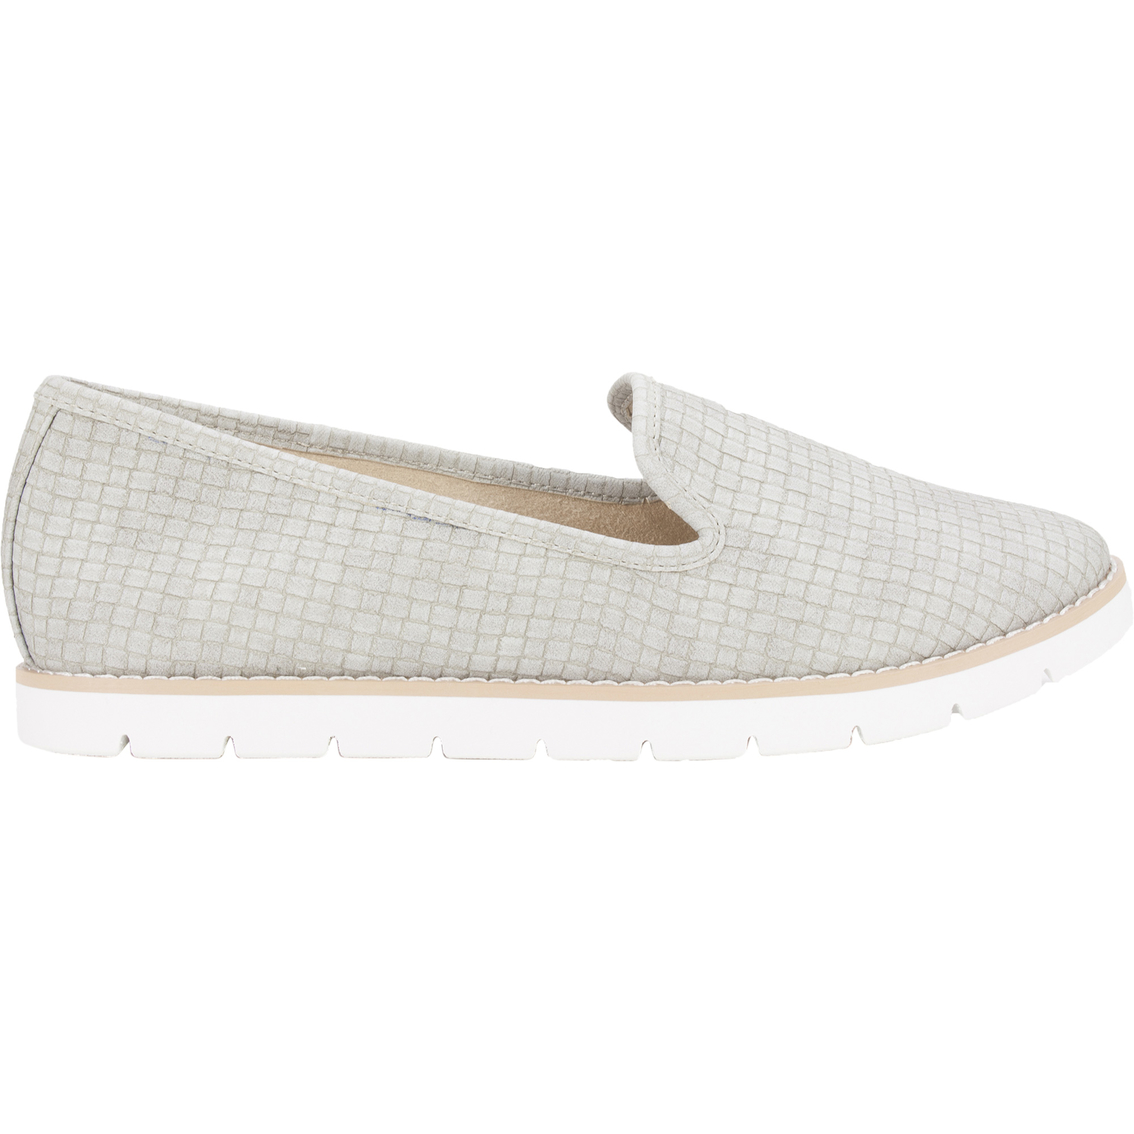 White Mountain Women's Denny Comfort Slip On Shoes - Image 2 of 5